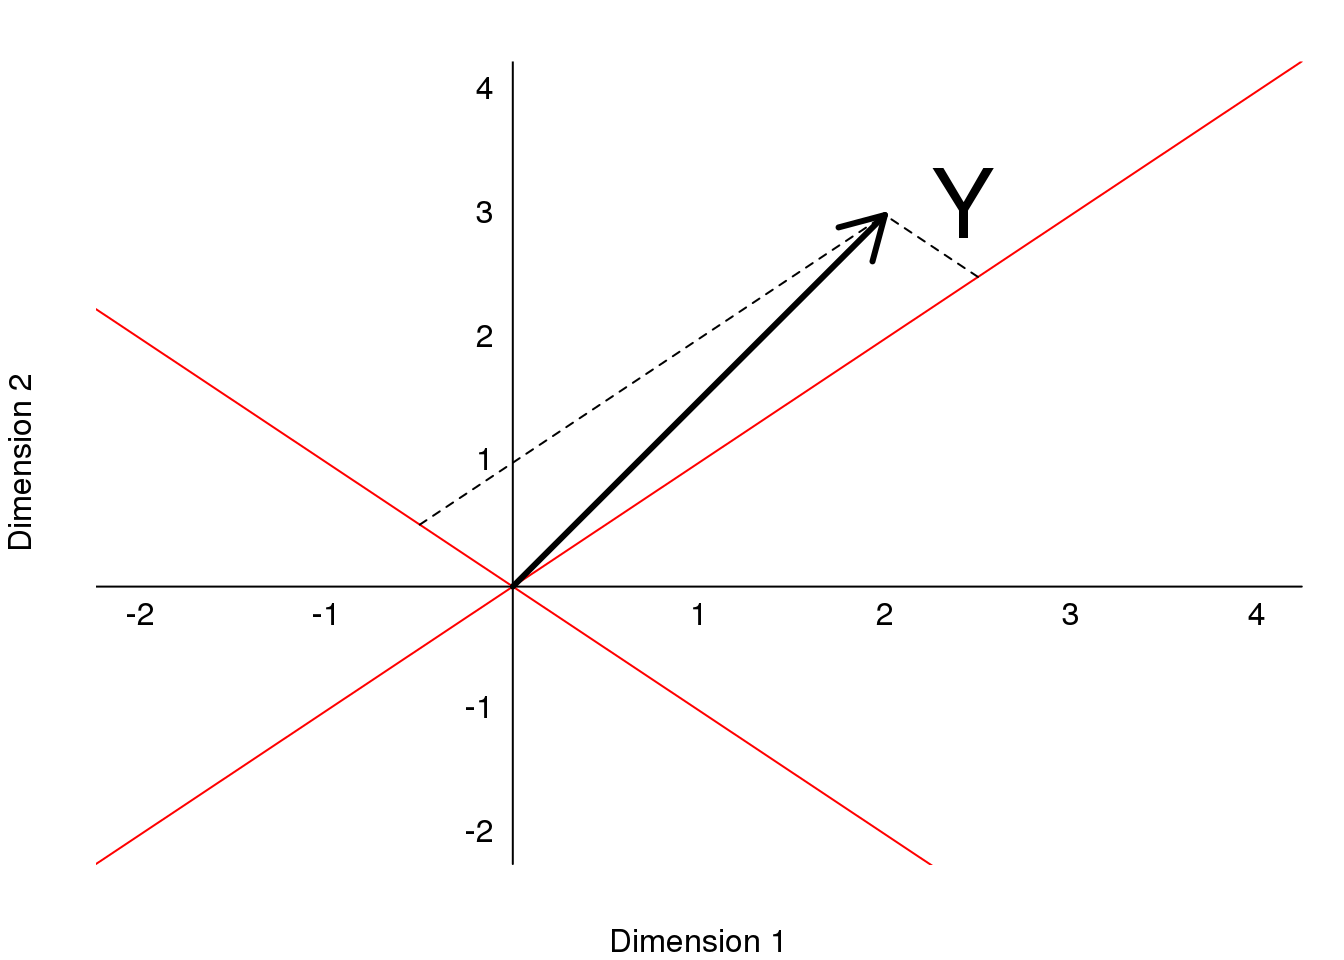 Plot of (2,3) as a vector in a rotatated space, relative to the original dimensions.